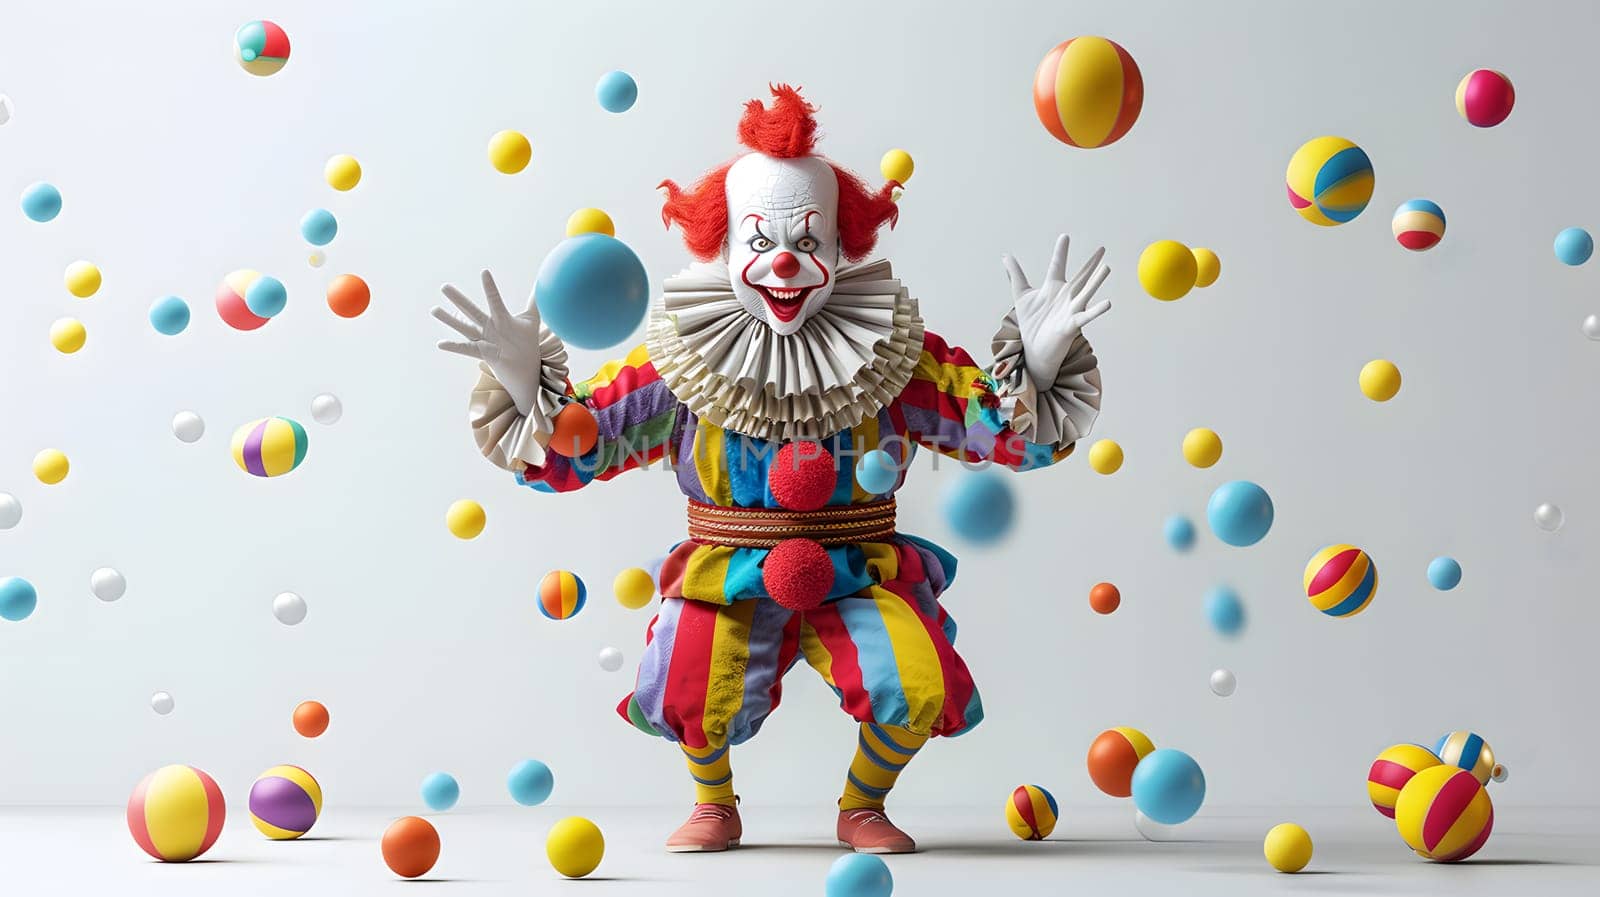 In a room filled with colorful balls, a happy clown entertains with playful gestures. This whimsical scene embodies the joy and artistry of performing arts